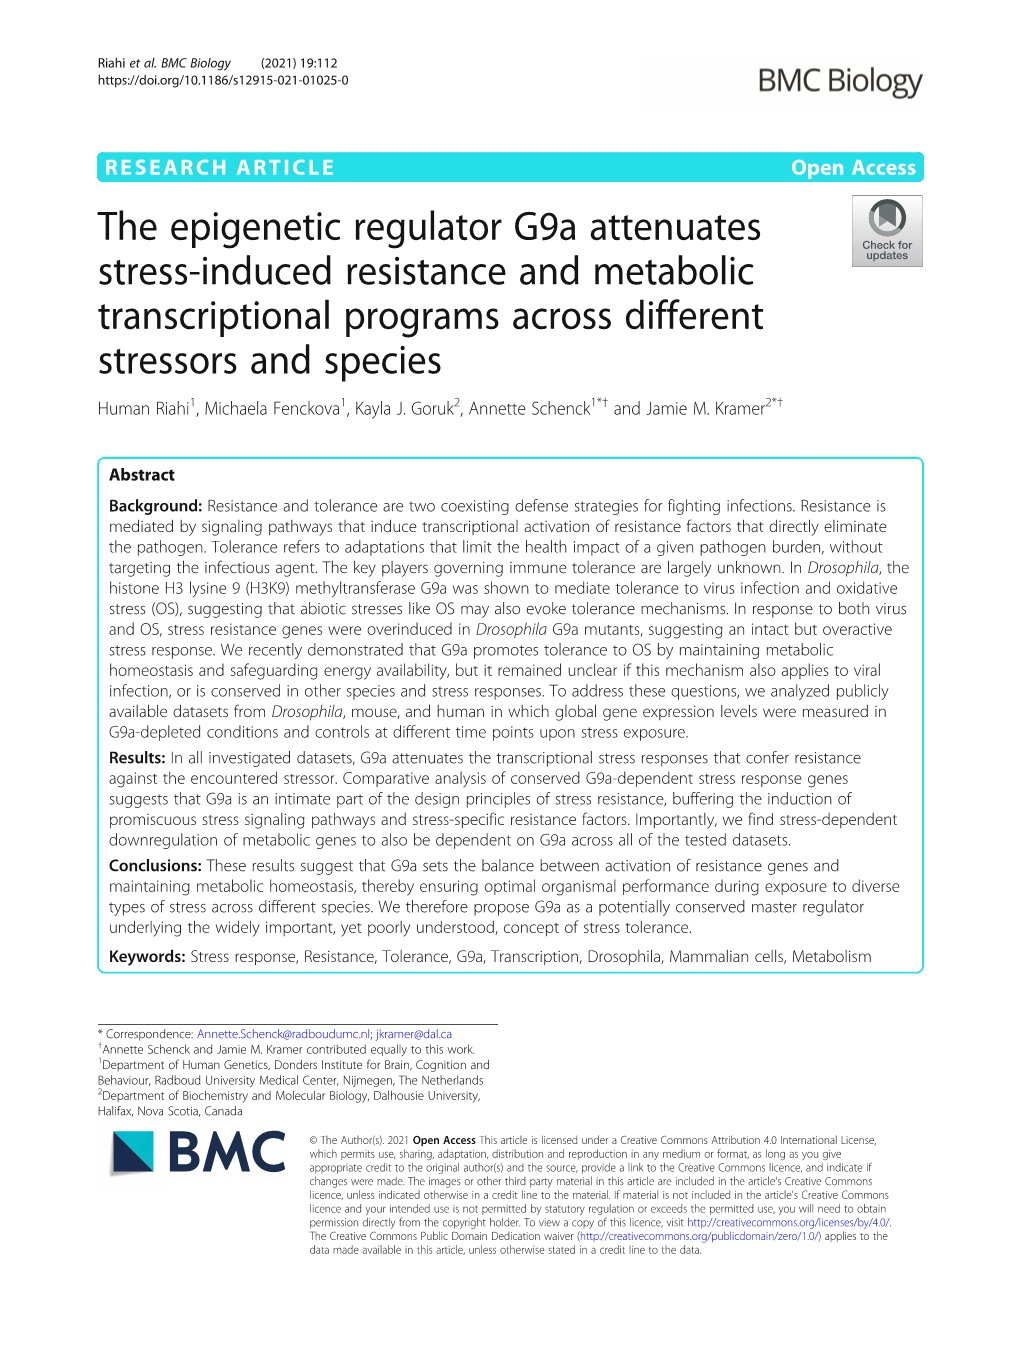 The Epigenetic Regulator G9a Attenuates Stress-Induced